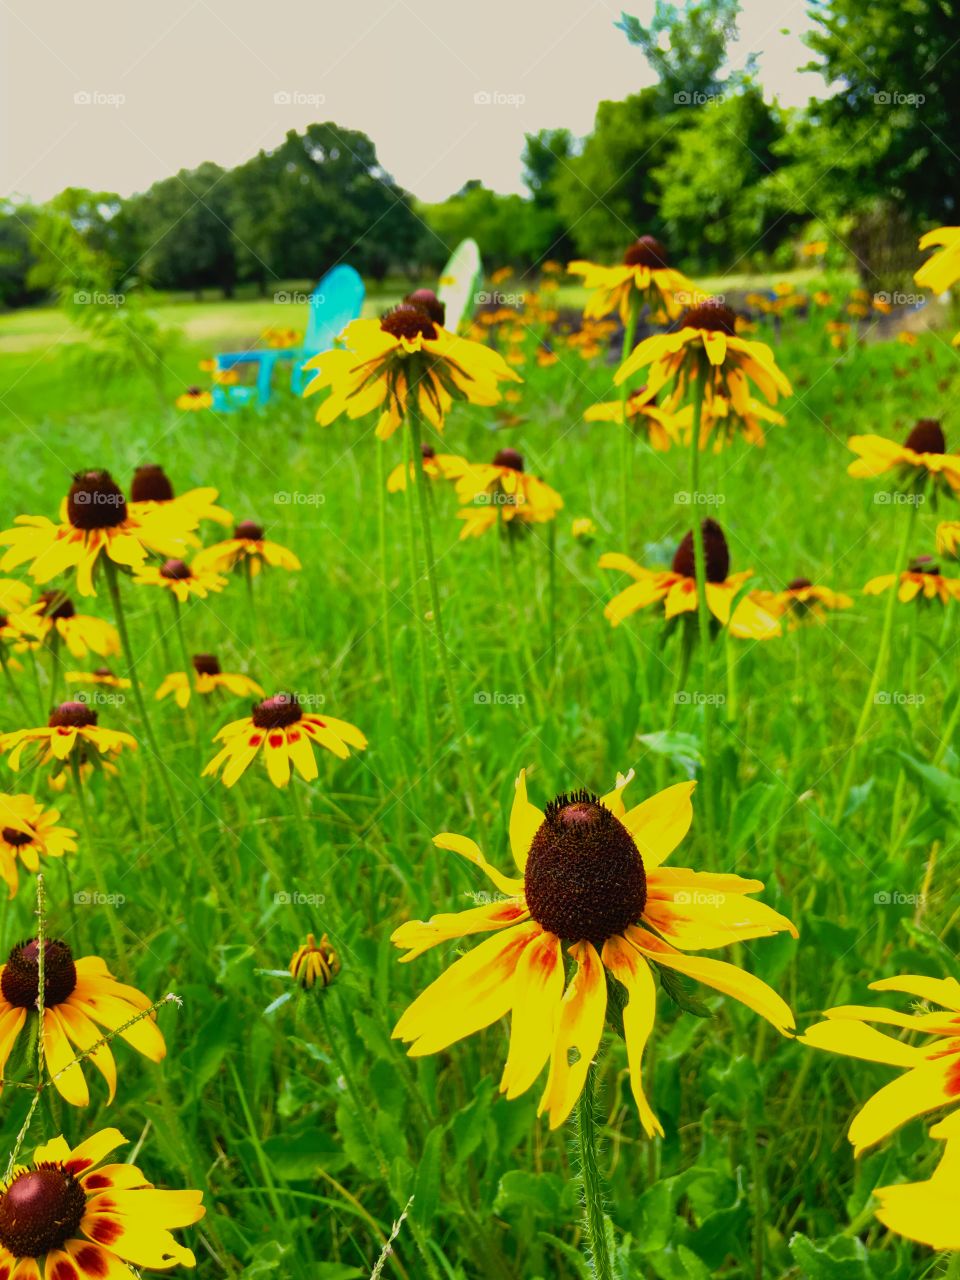 Yellow wild sunflowers growing in yard with colorful lawn chairs in background 